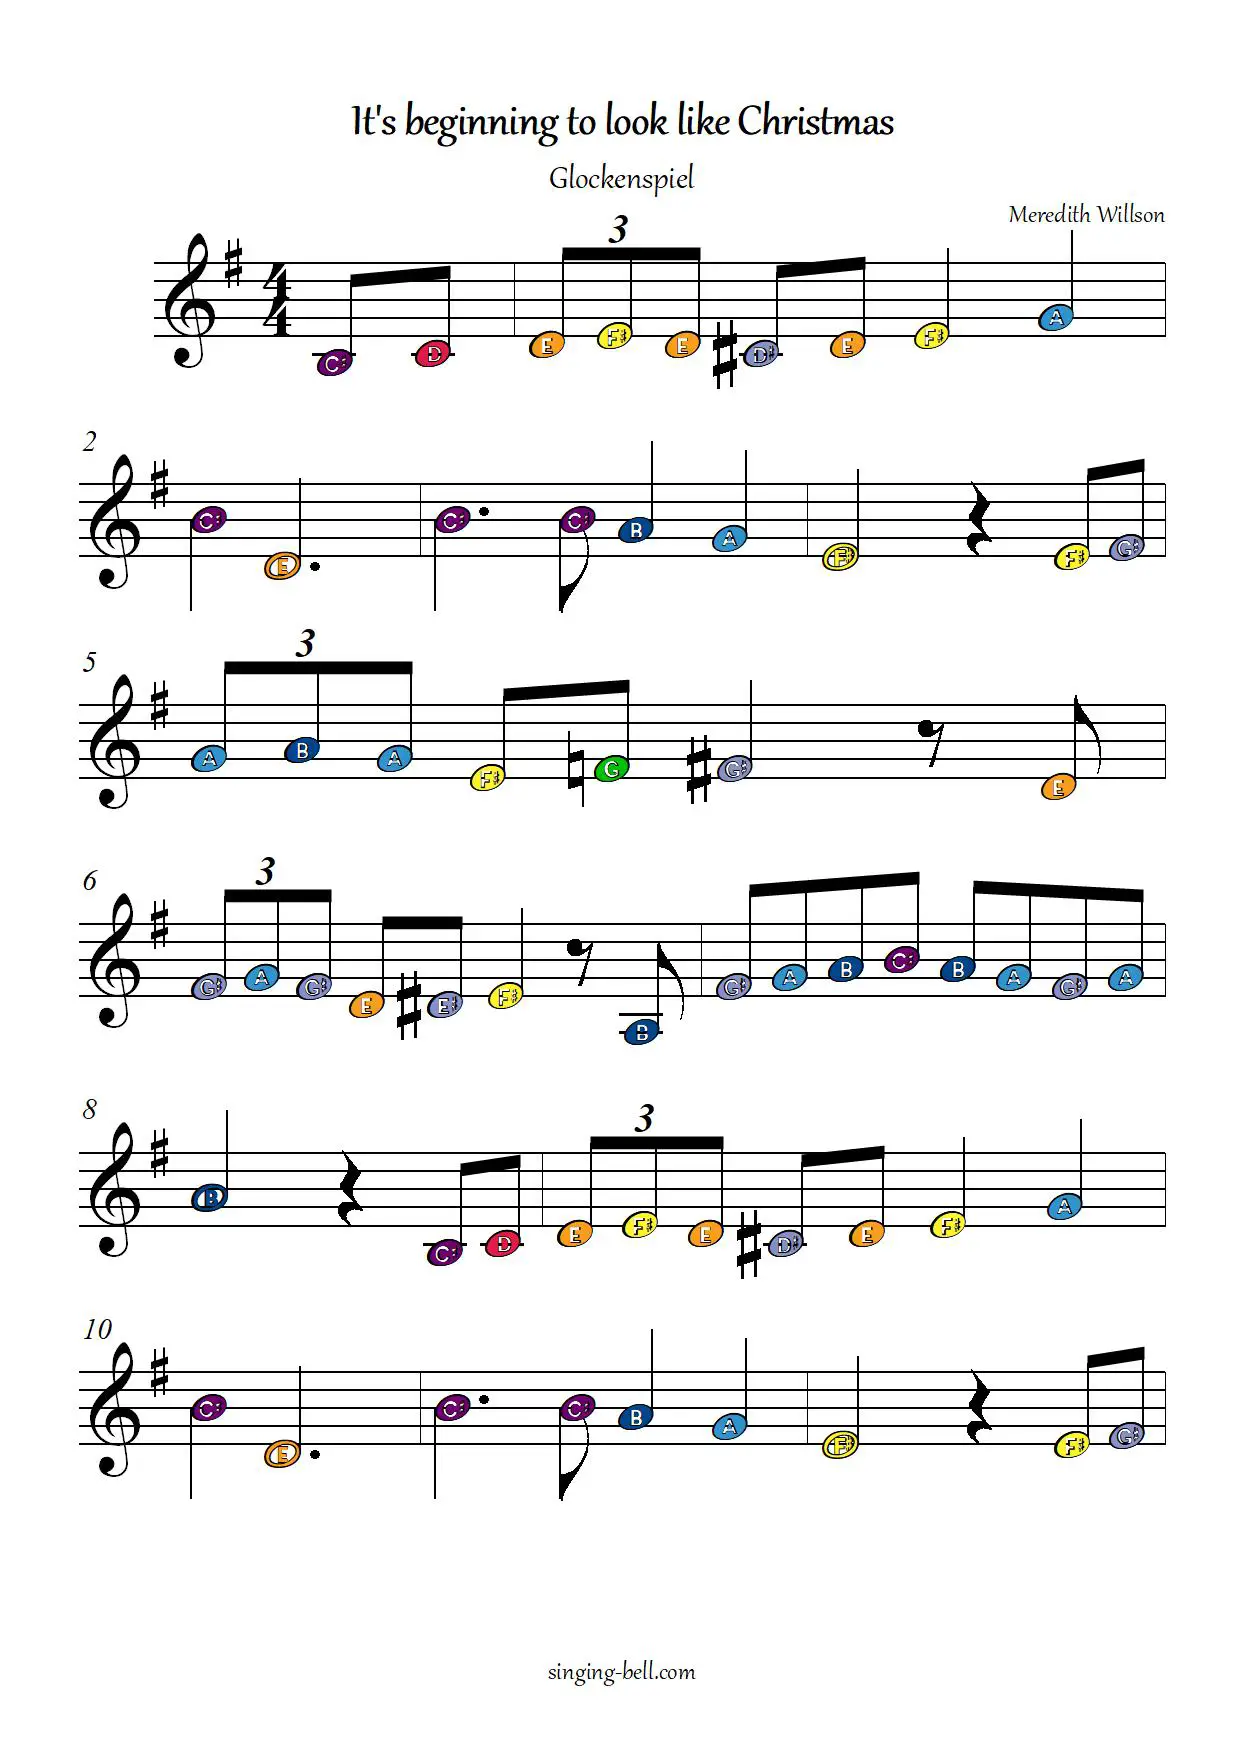 It's beginning to look like Christmas free xylophone glockenspiel sheet music color notes chart pdf p.1